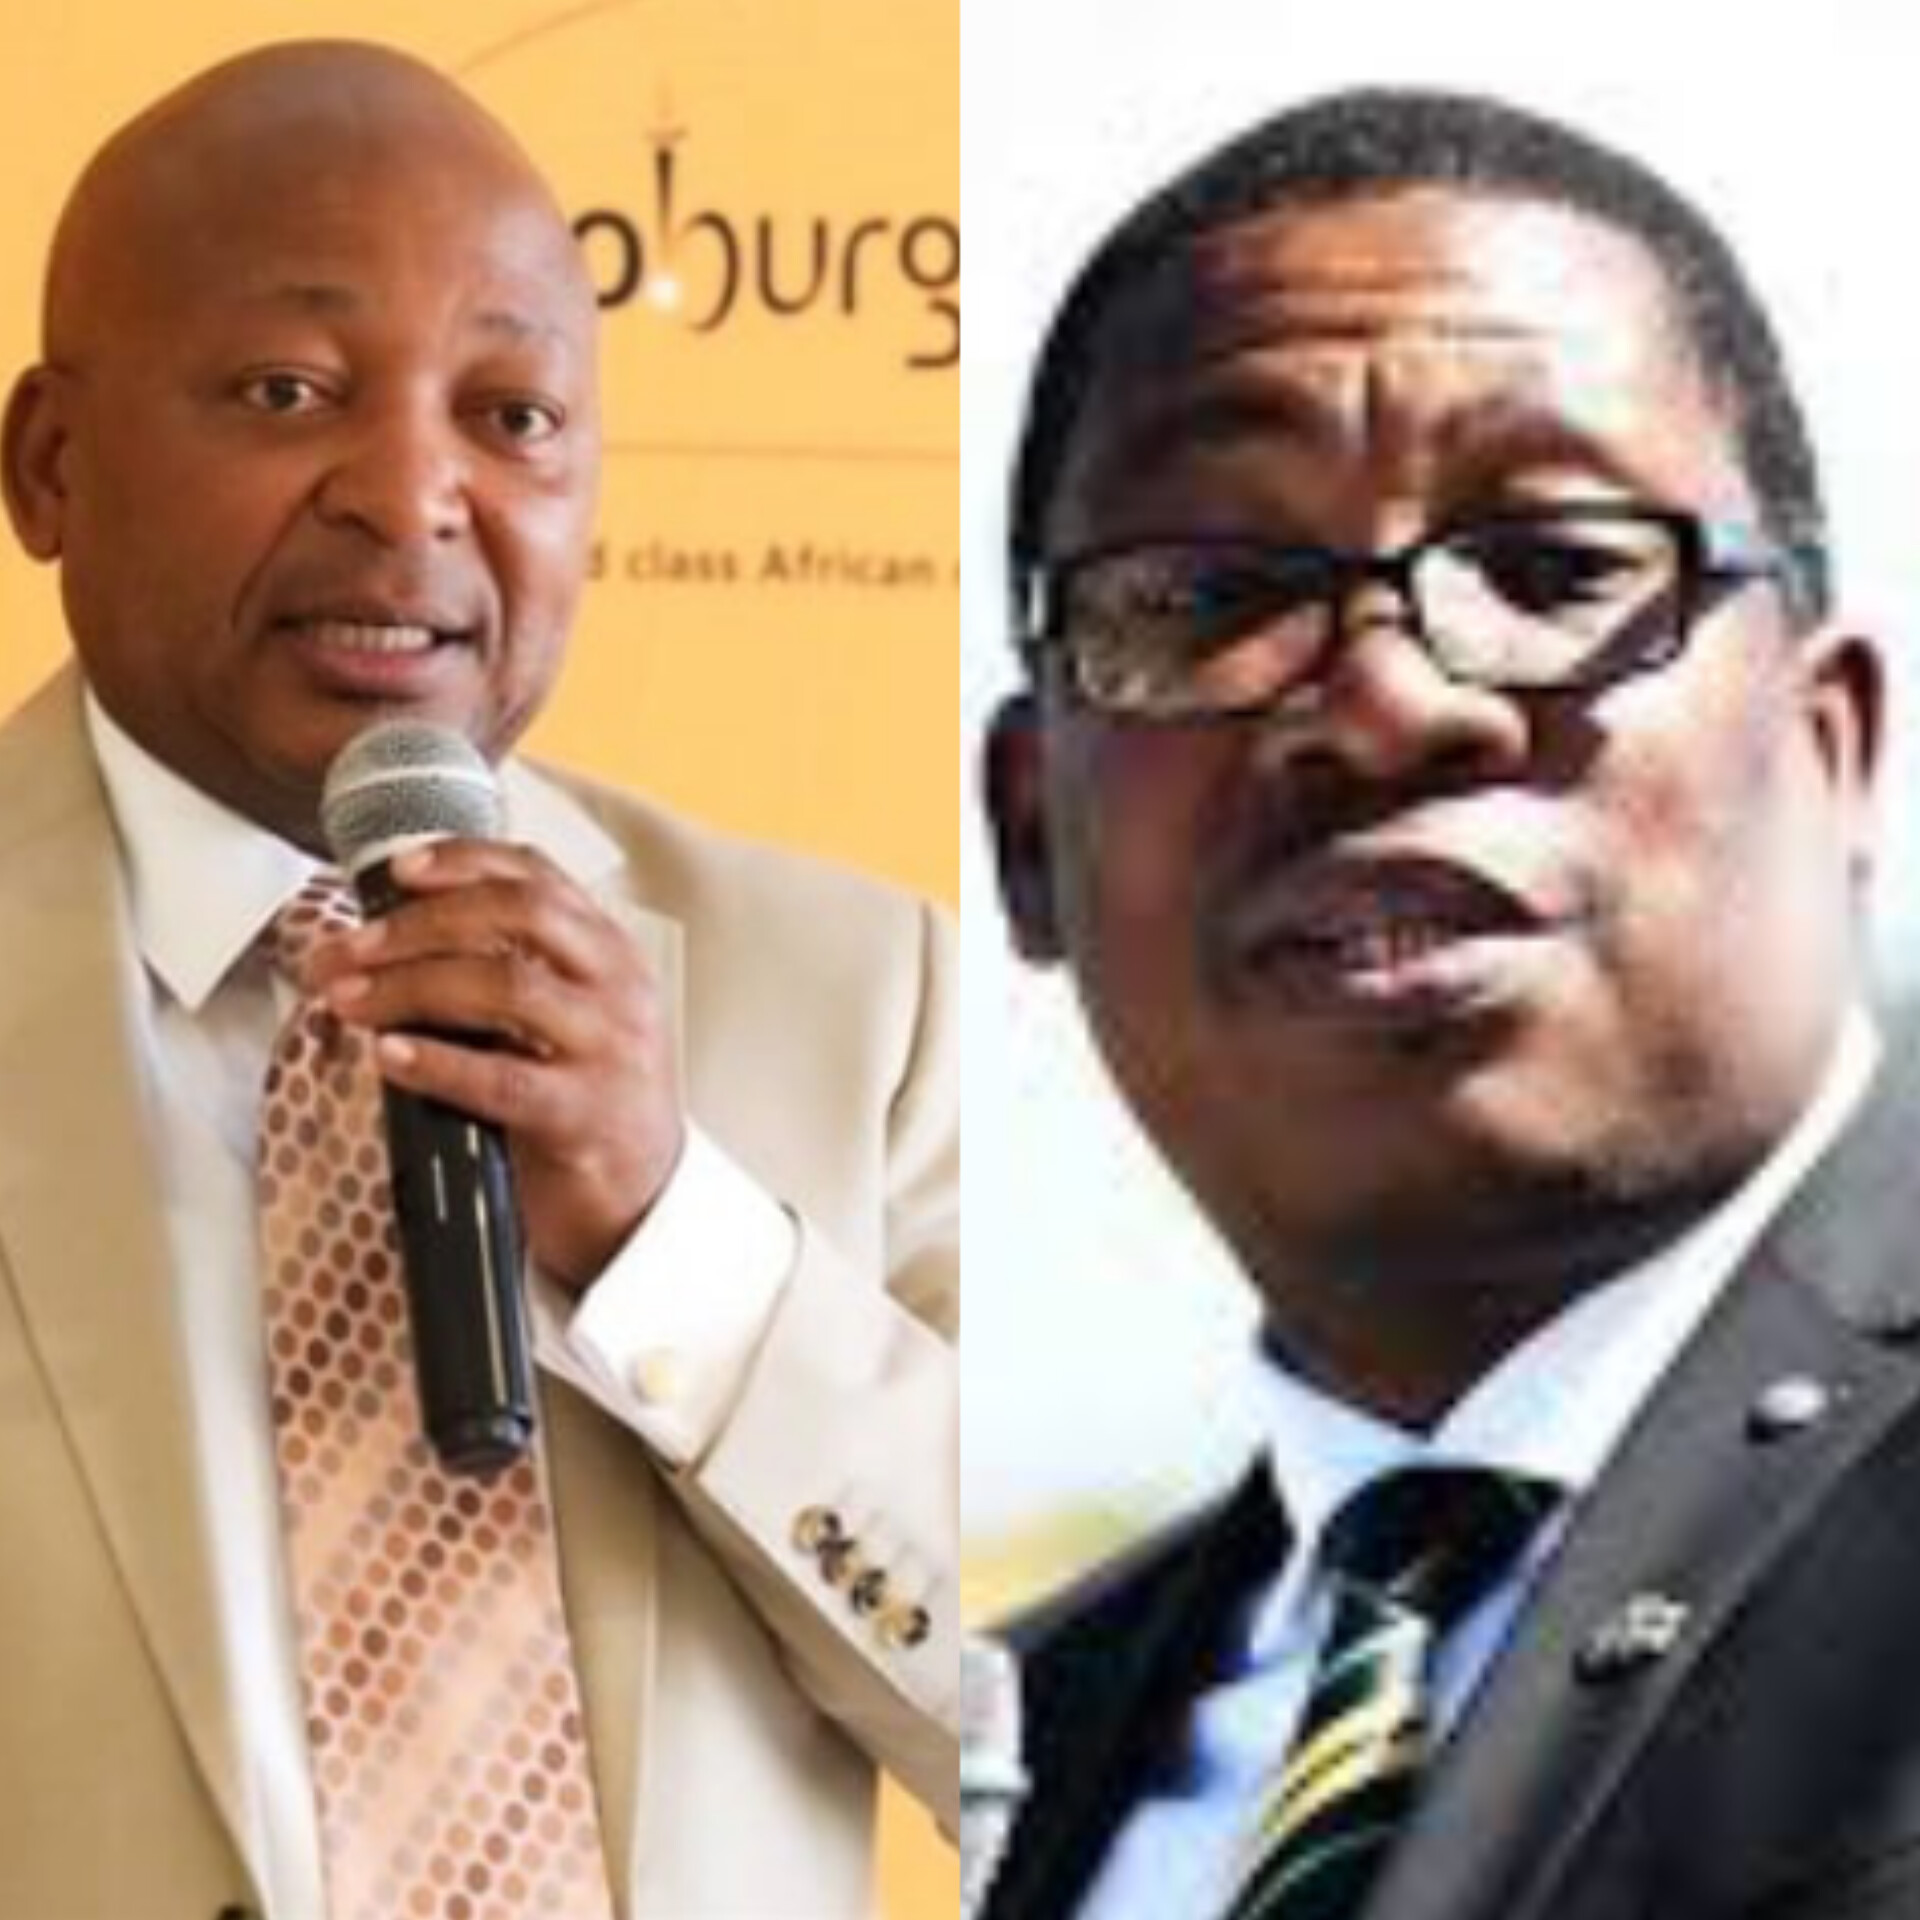 You are Gauteng premier, not premier of Johannesburg – Kunene warns Lesufi, whom he accuses of breaching intergovernmental relations